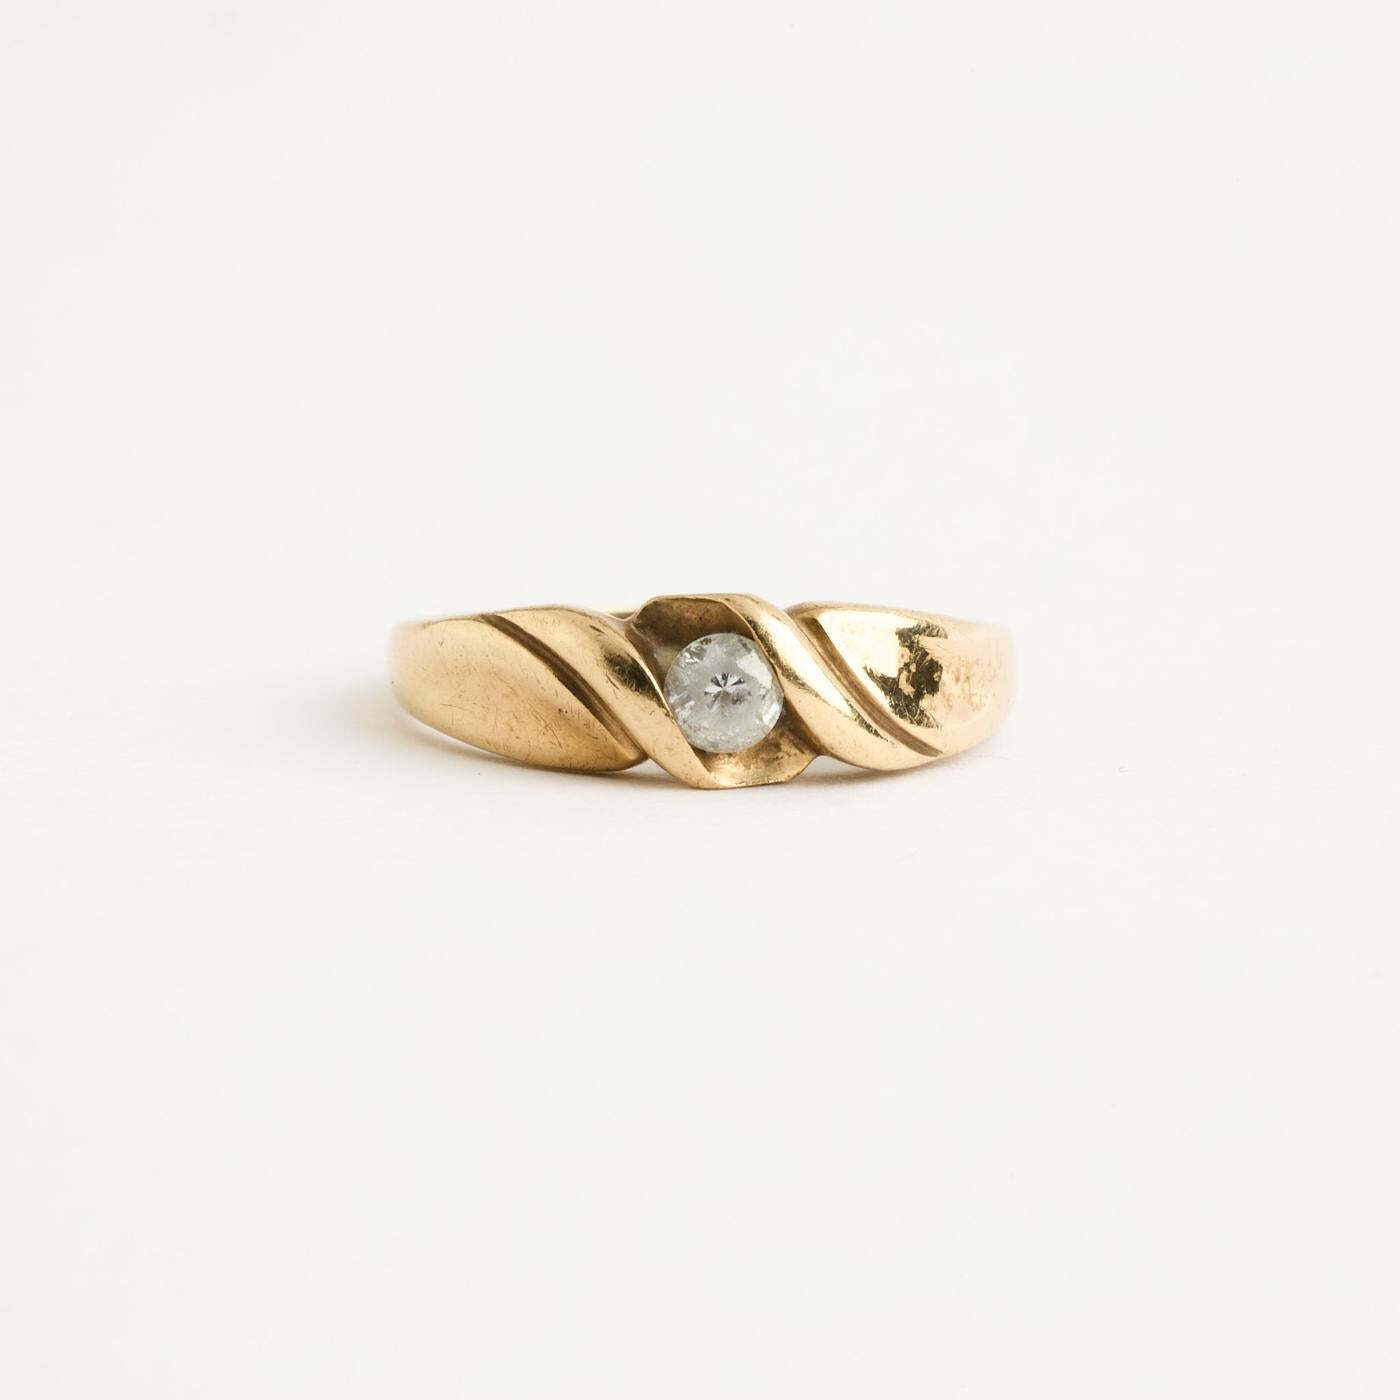 Ring in 8K Gold size 5¼ | Real Genuine Gold | Fine Jewelry | Nordic